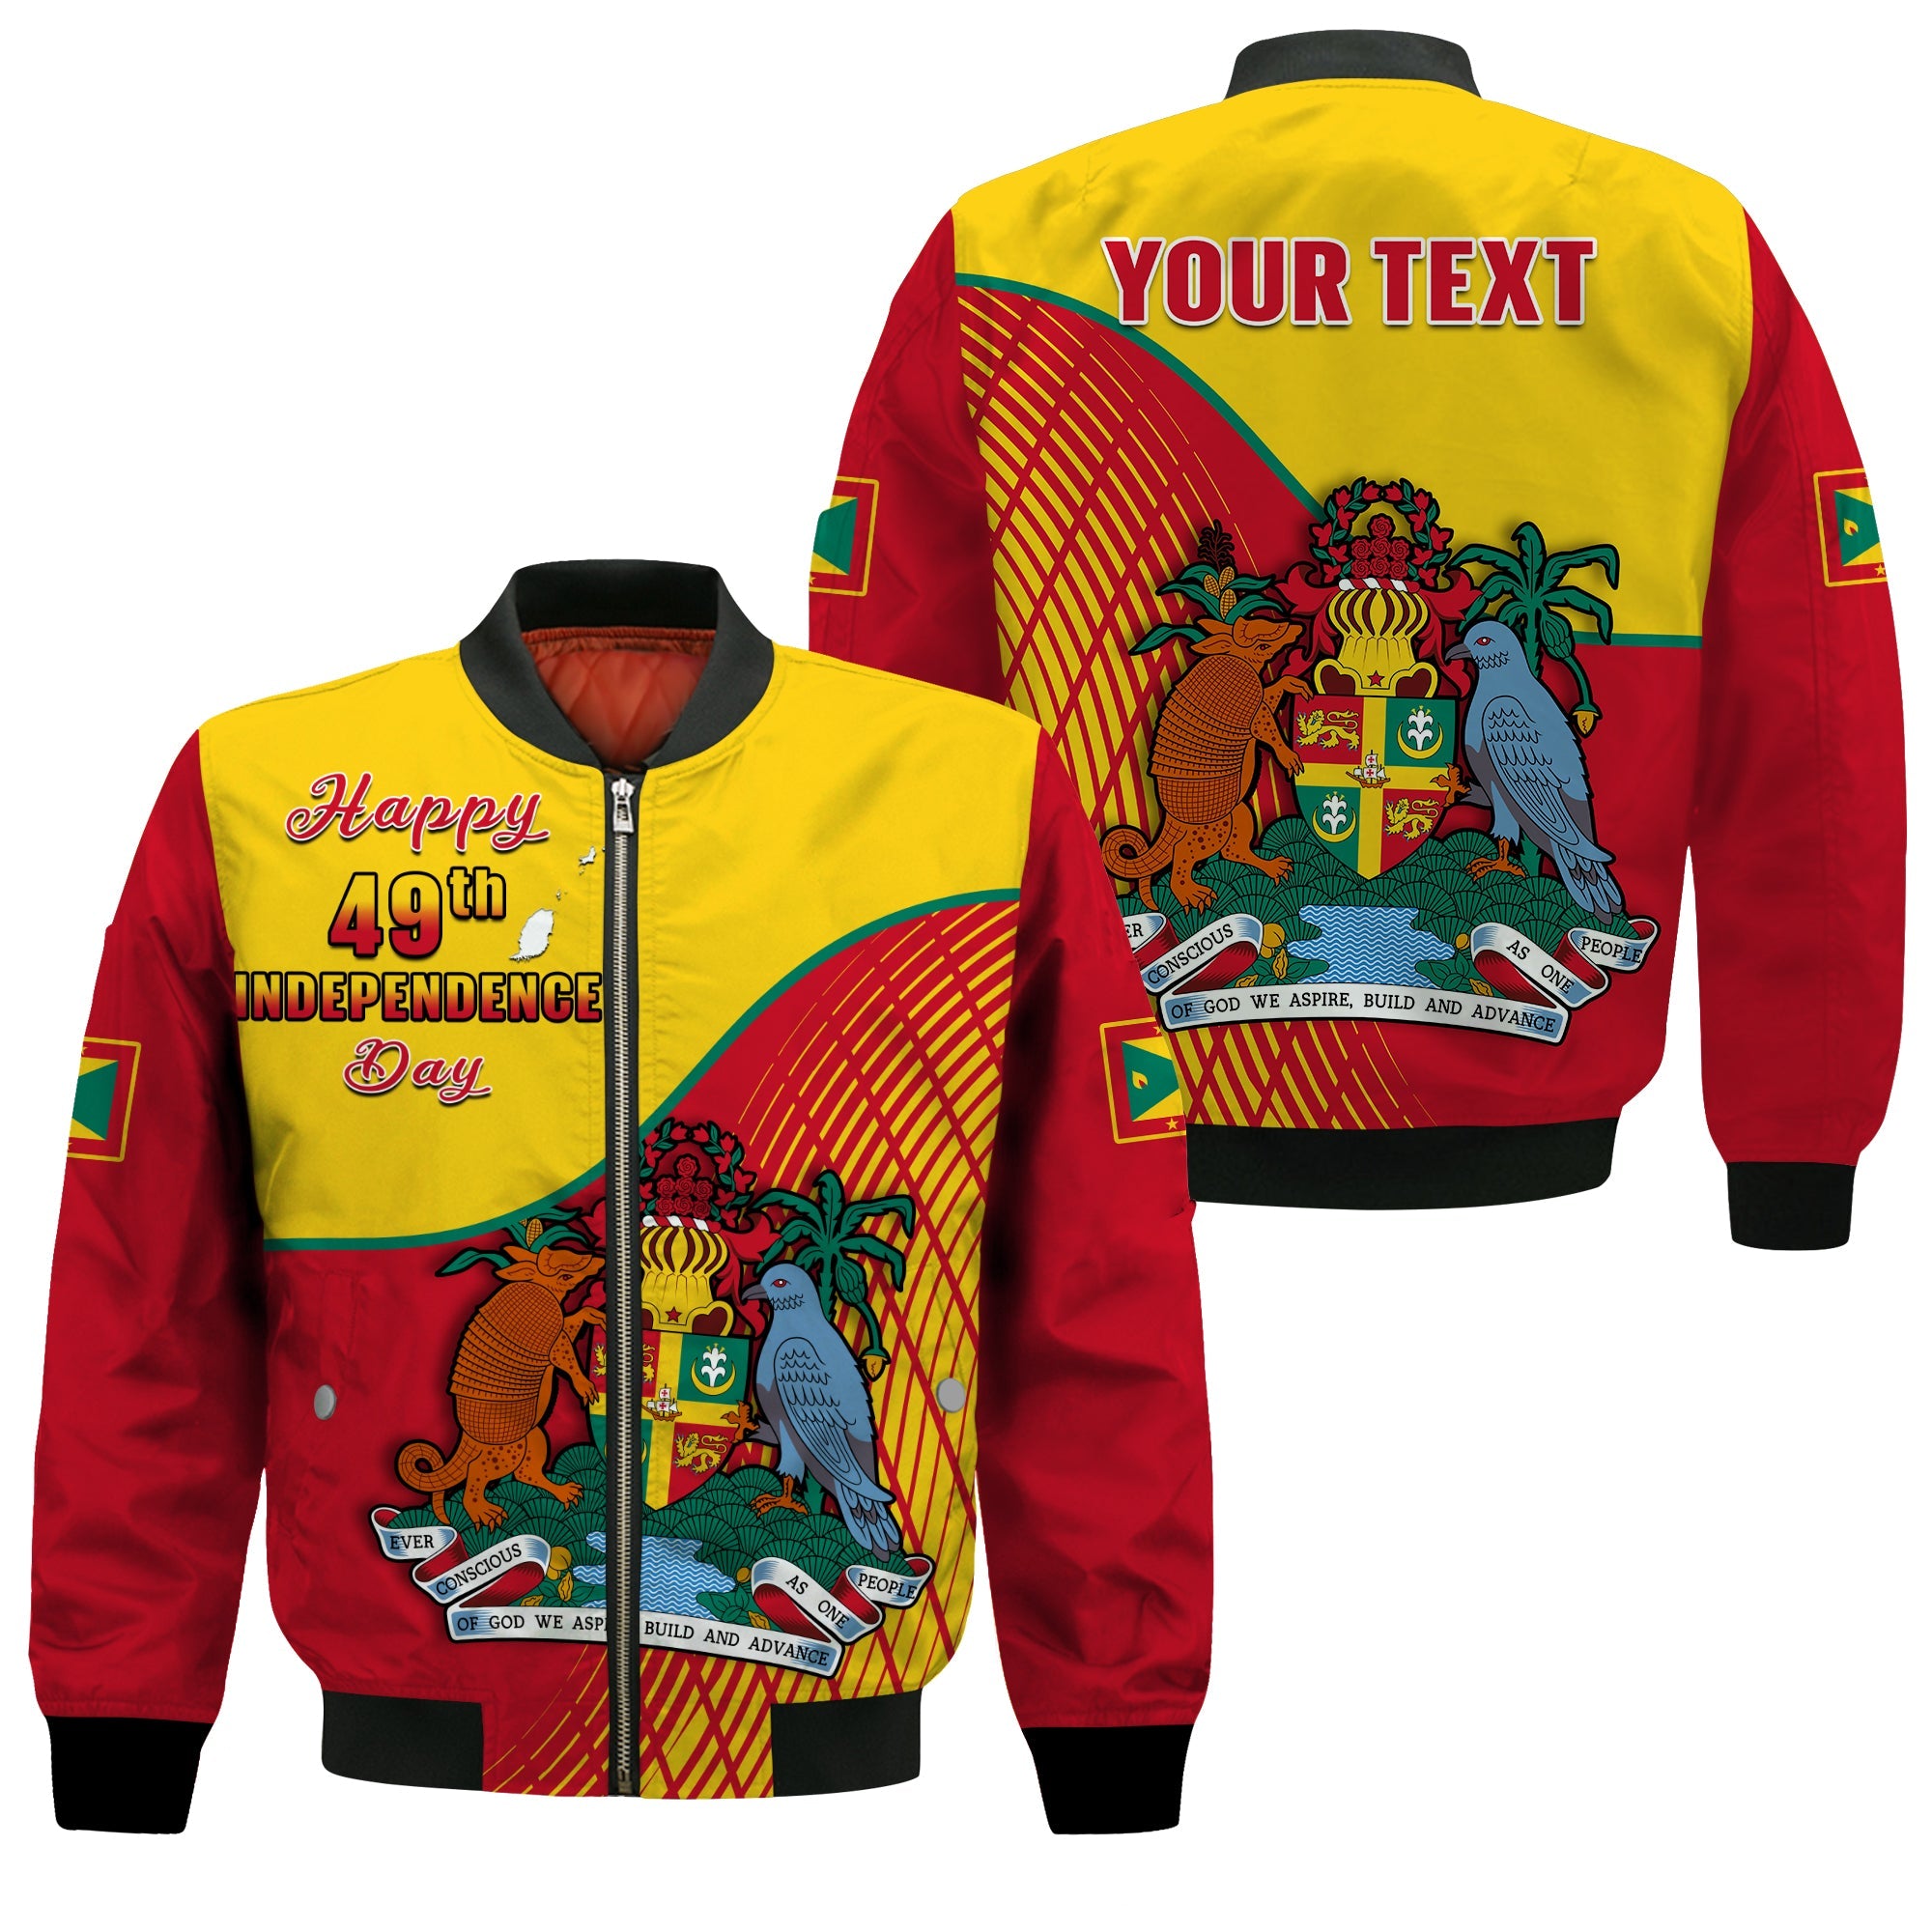 custom-personalised-grenada-bomber-jacket-coat-of-arms-happy-49th-independence-day